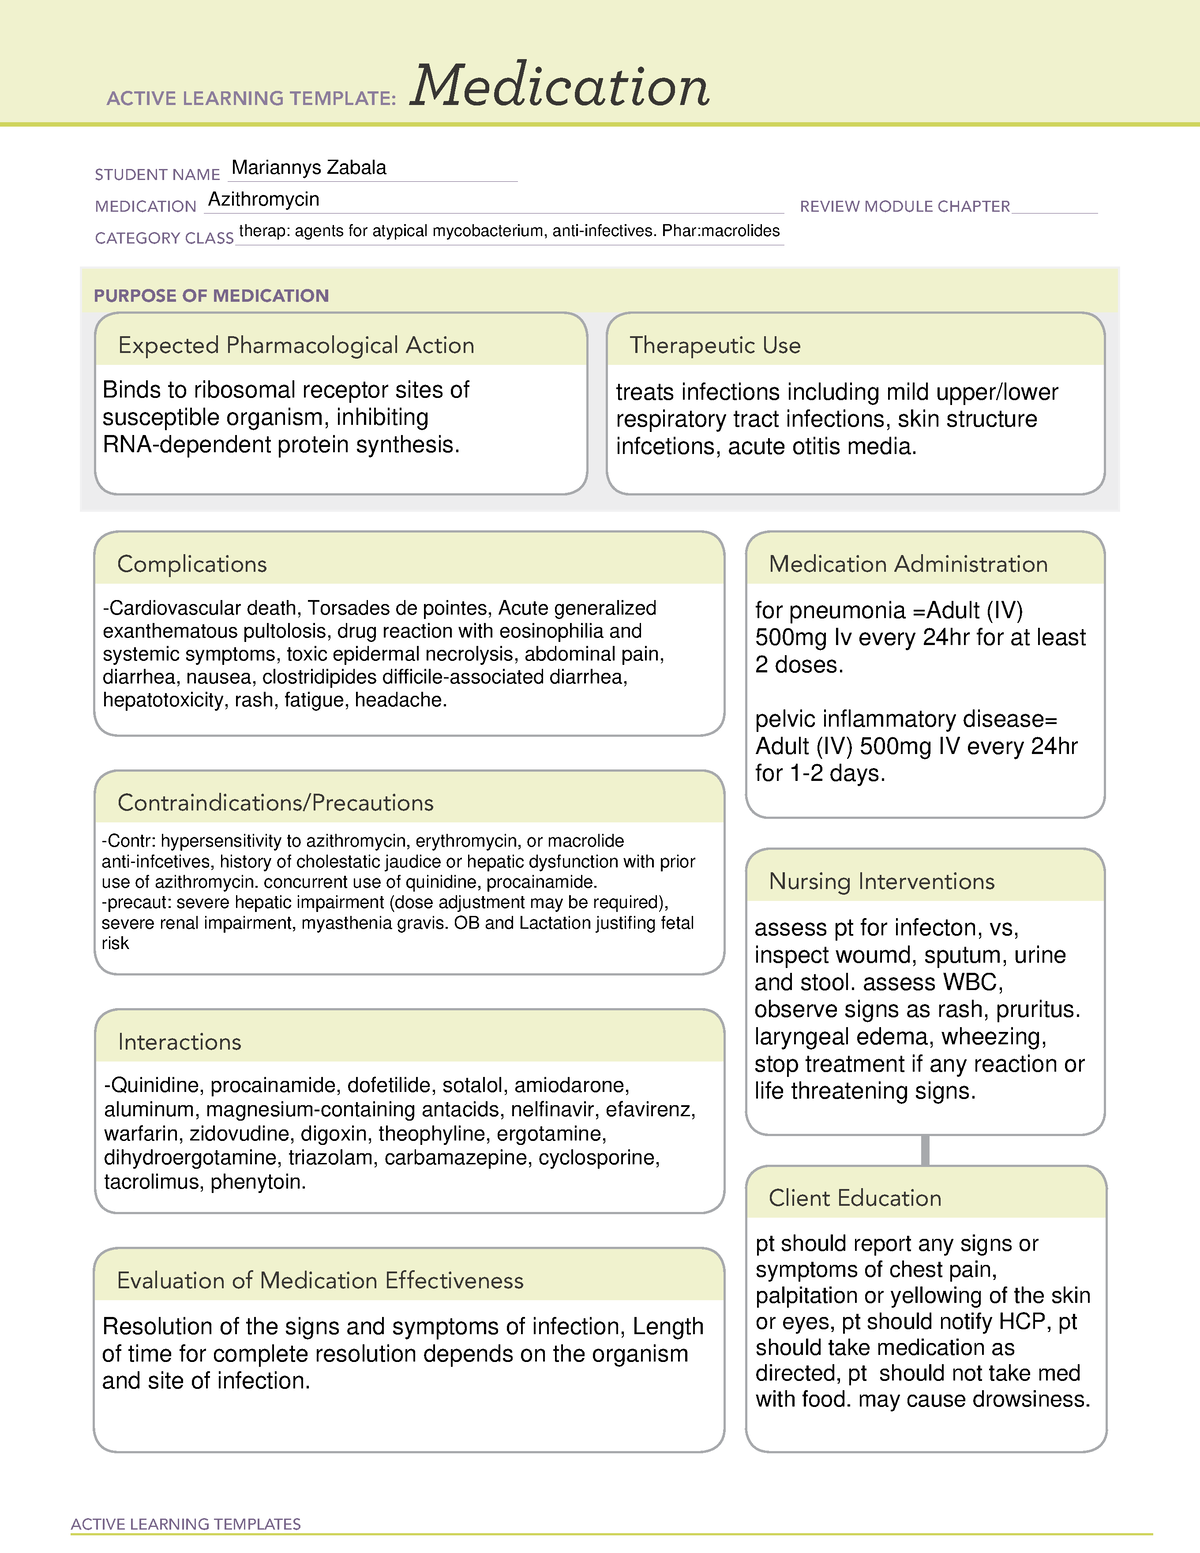 ATIMedication Template(Azithromycin IV) ACTIVE LEARNING TEMPLATES